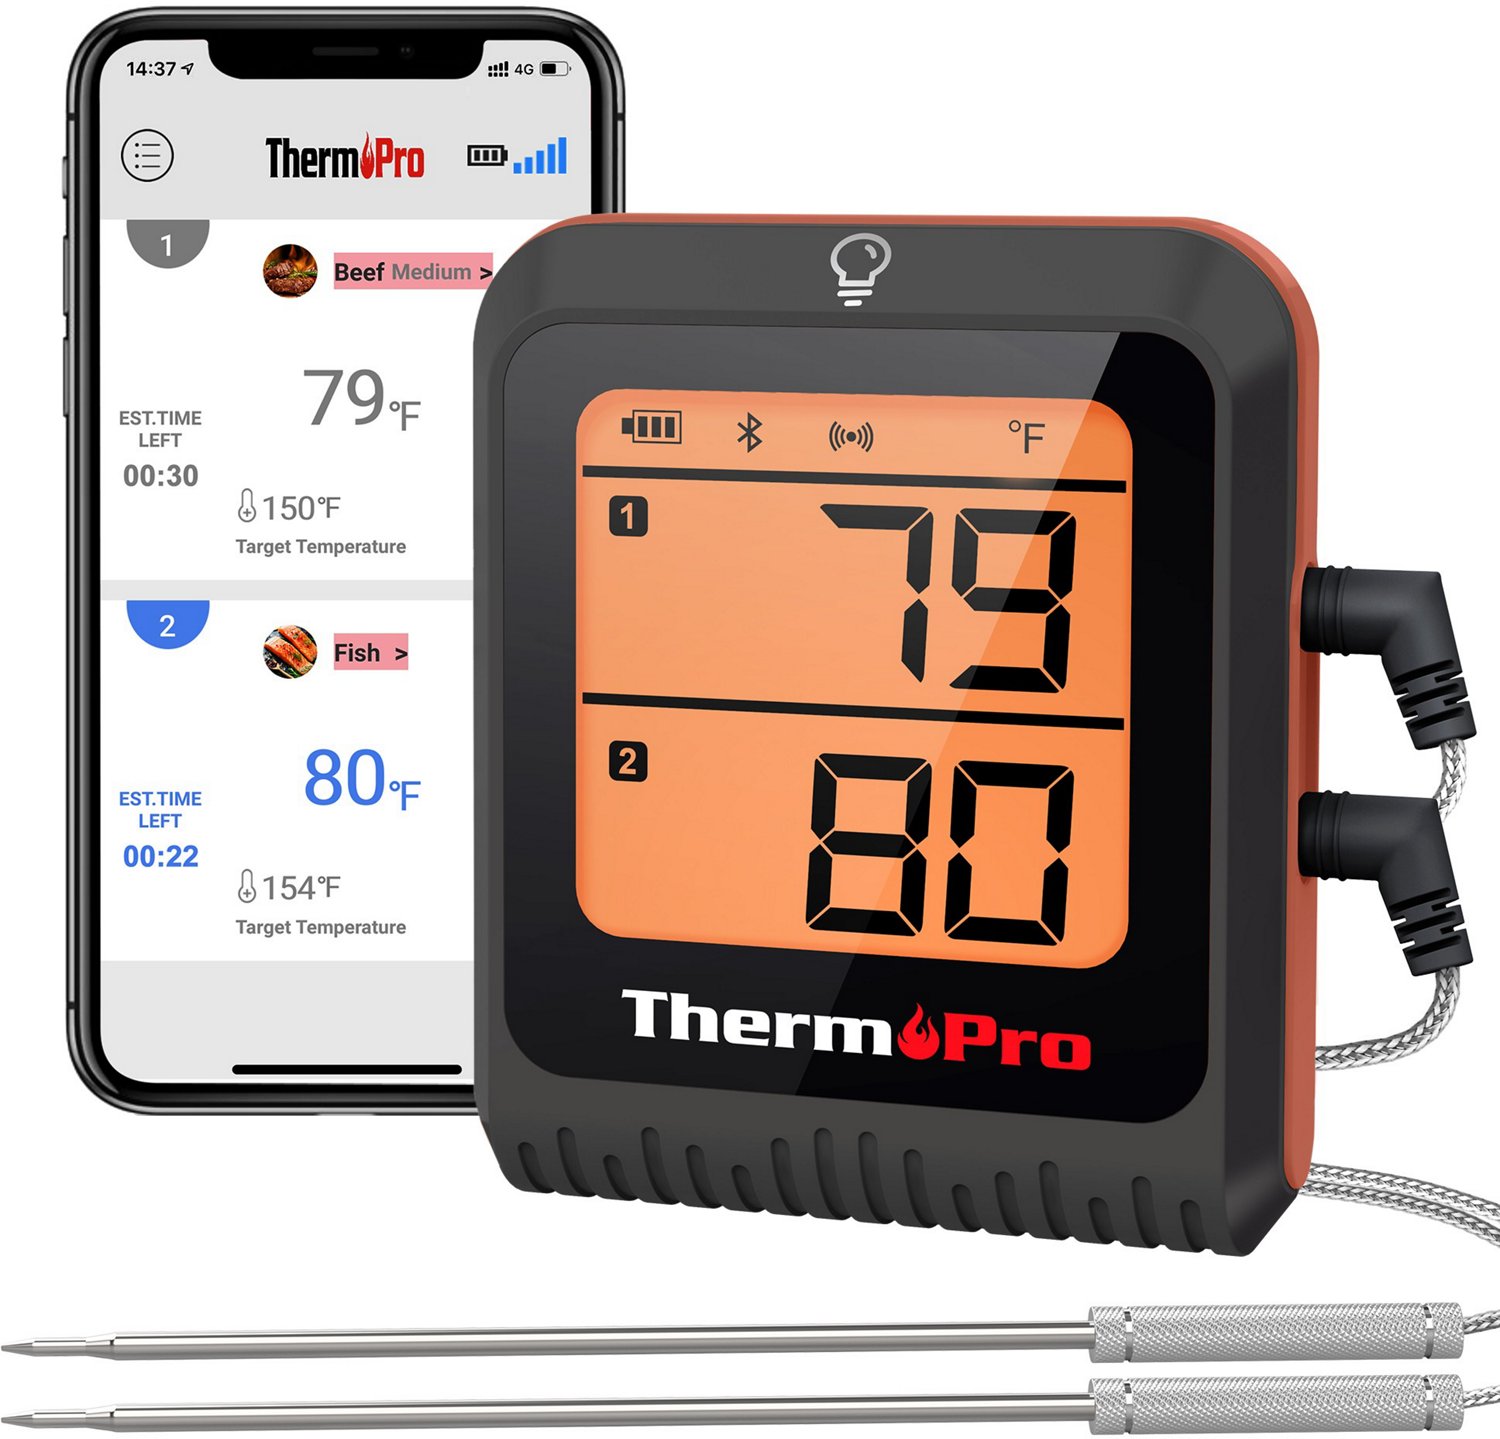 ThermoPro Launches Smart Dual-Probe Meat Thermometer